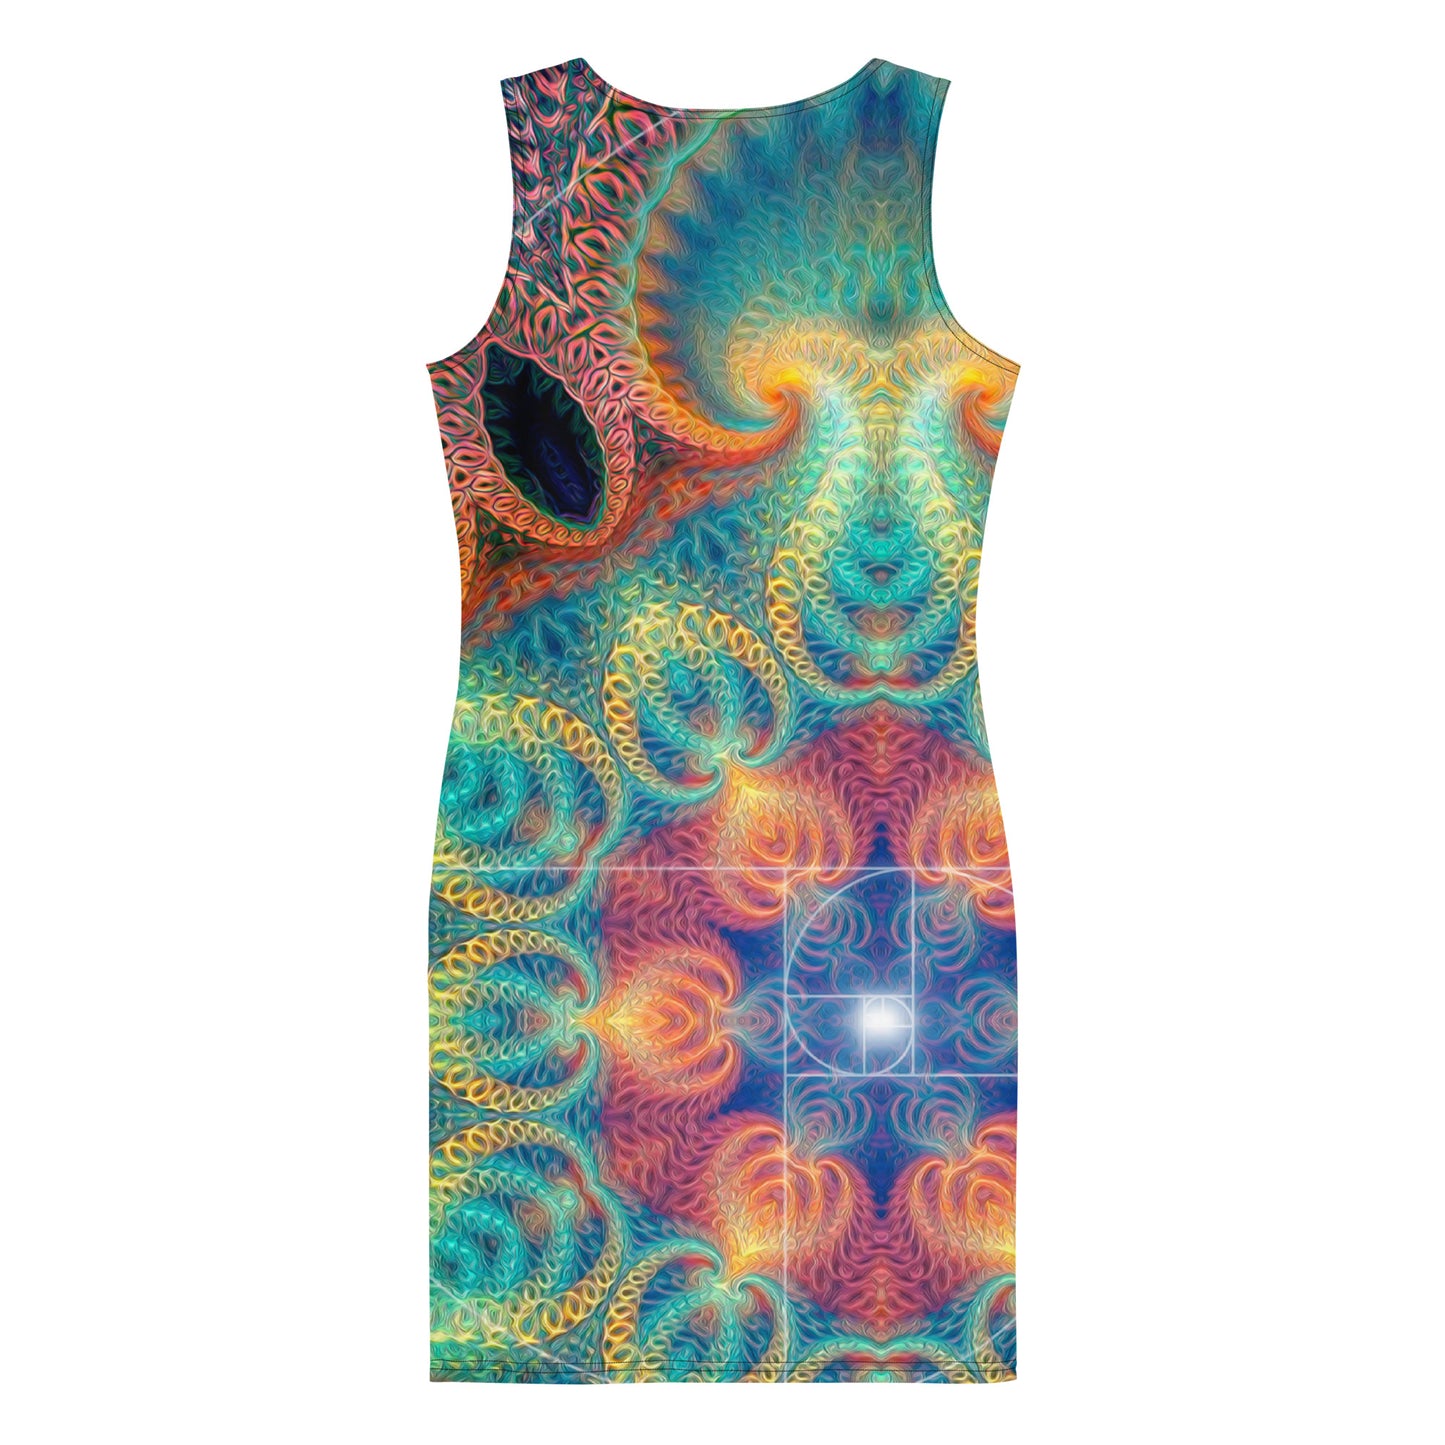 "Free Your Mind Fibonacci" Bodycon FITTED DRESS